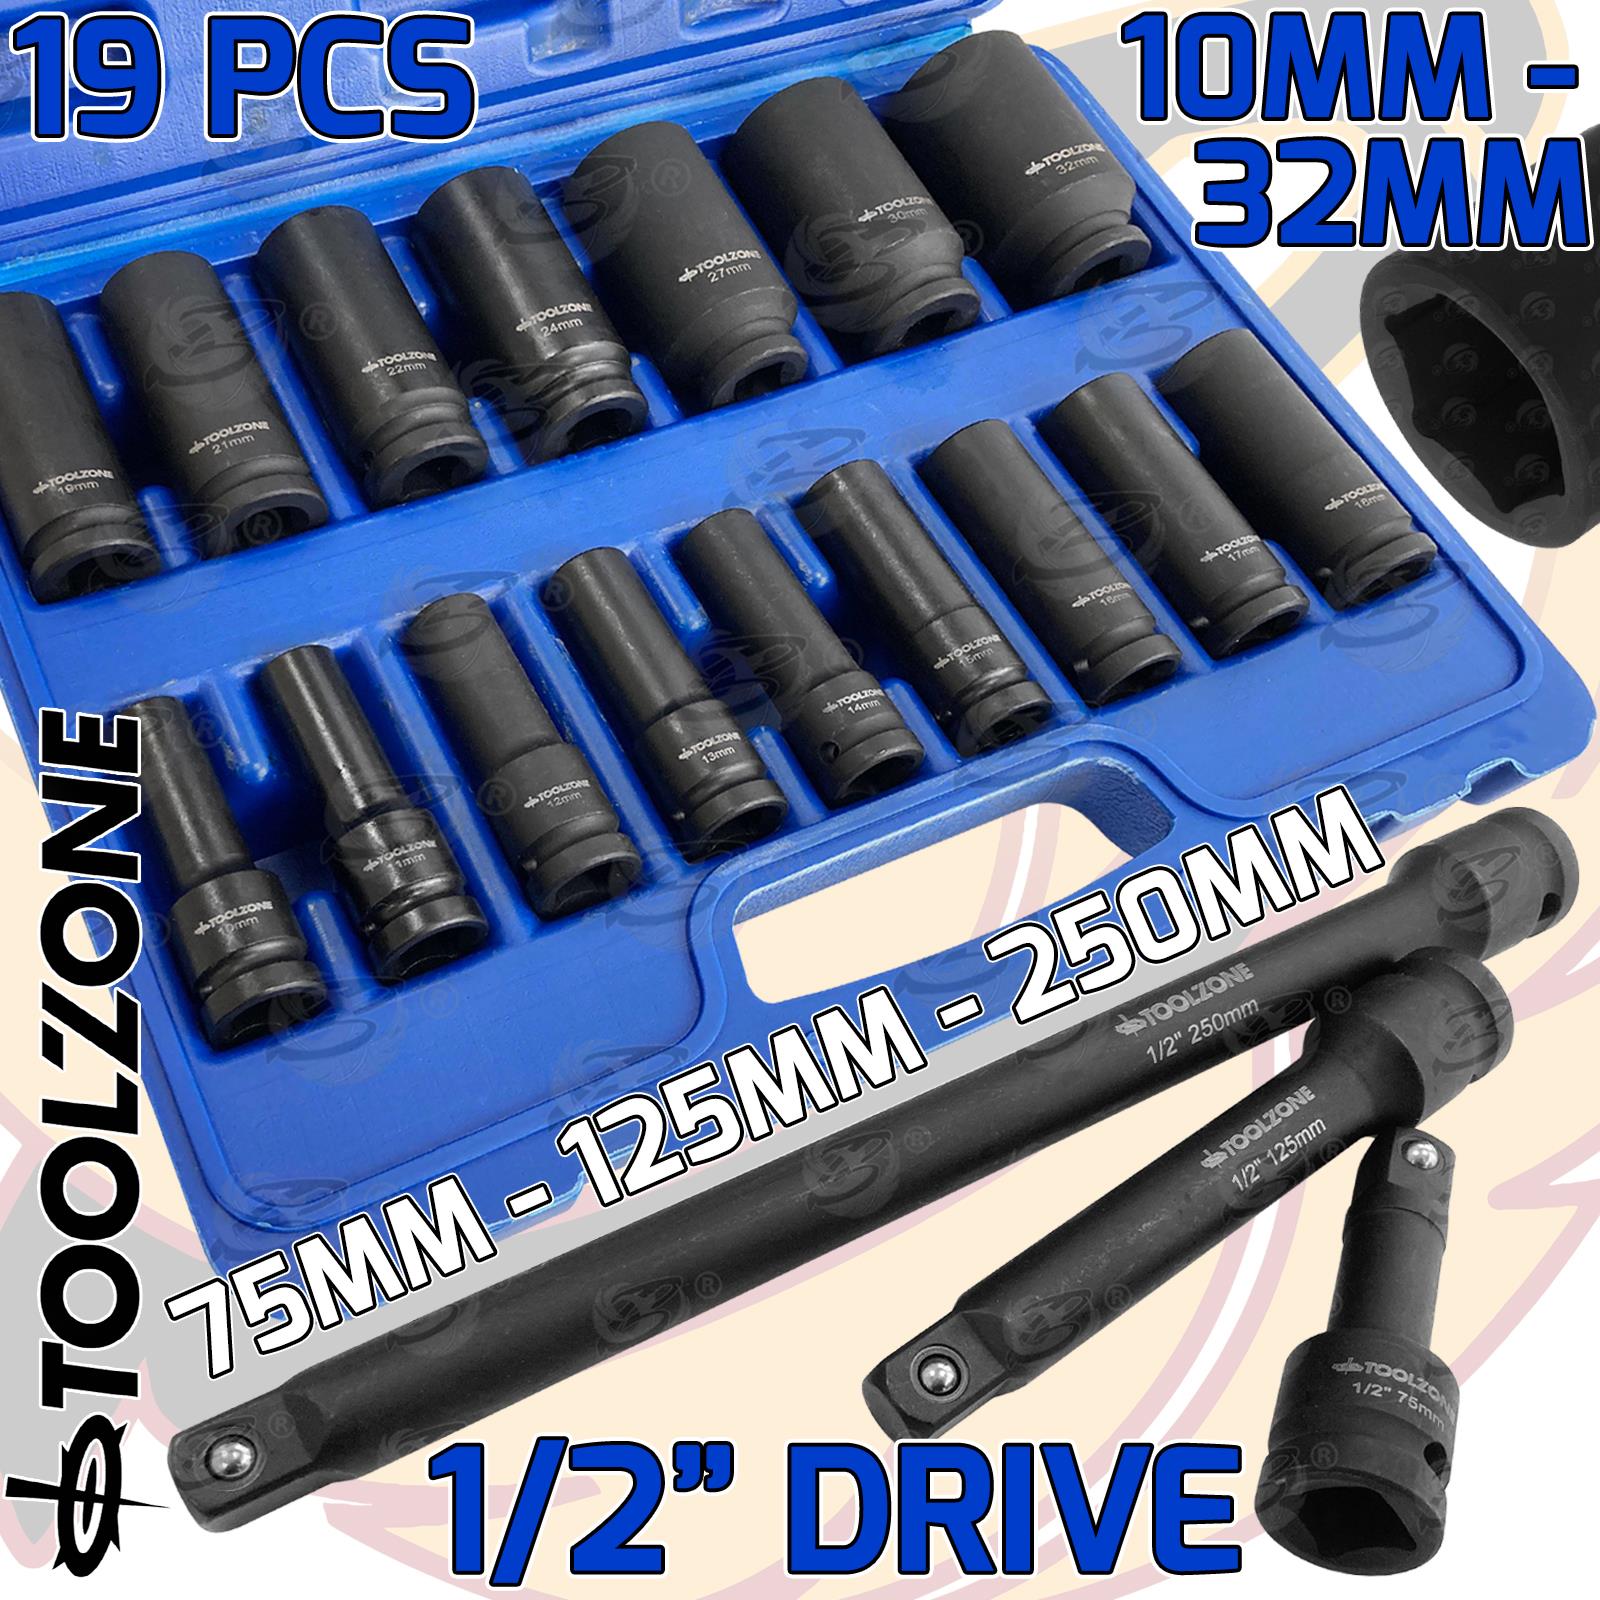 TOOLZONE 19PCS 1/2" DRIVE 6 POINT DEEP IMPACT SOCKETS & EXTENSIONS 10MM - 32MM